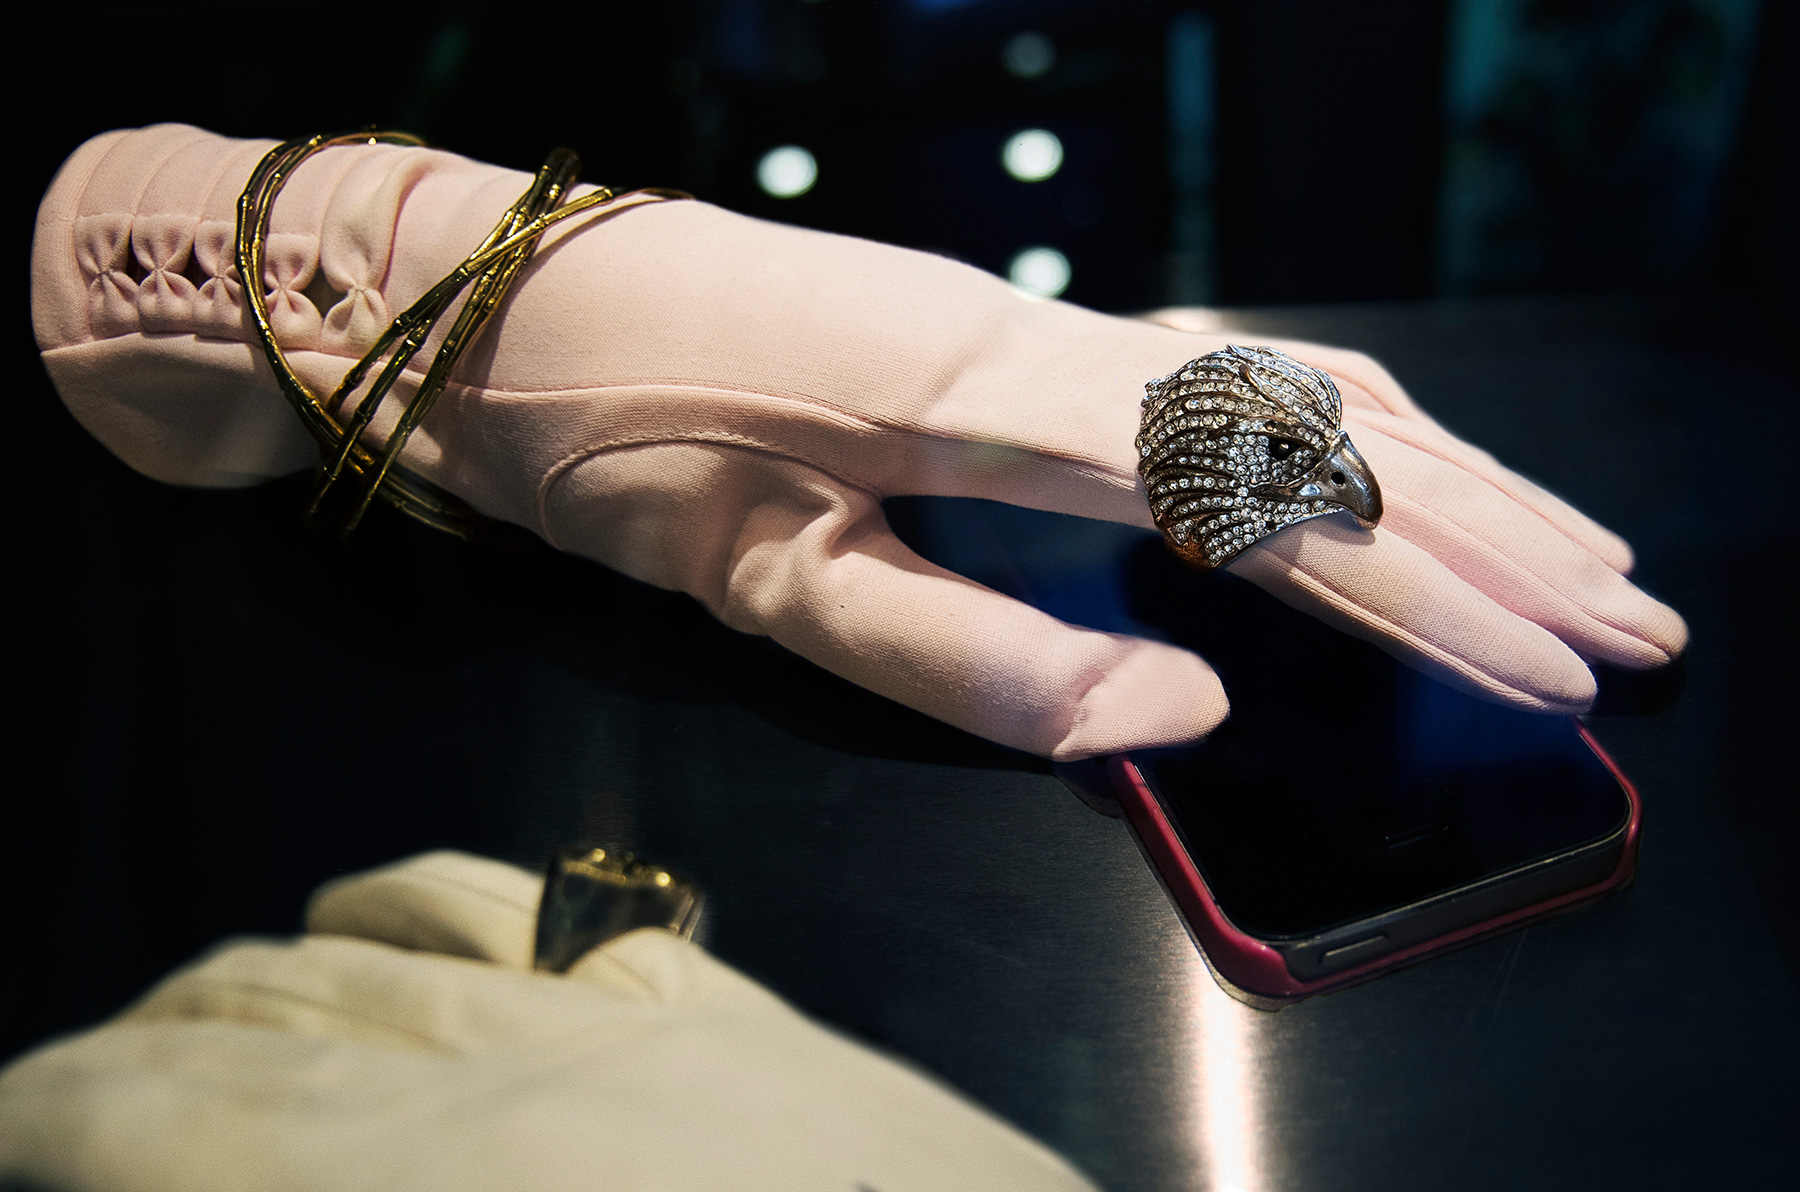 Annoushka Milestones Exhibition display cabinet - Jewellery worn on gloved mannequin hand with mobile phone